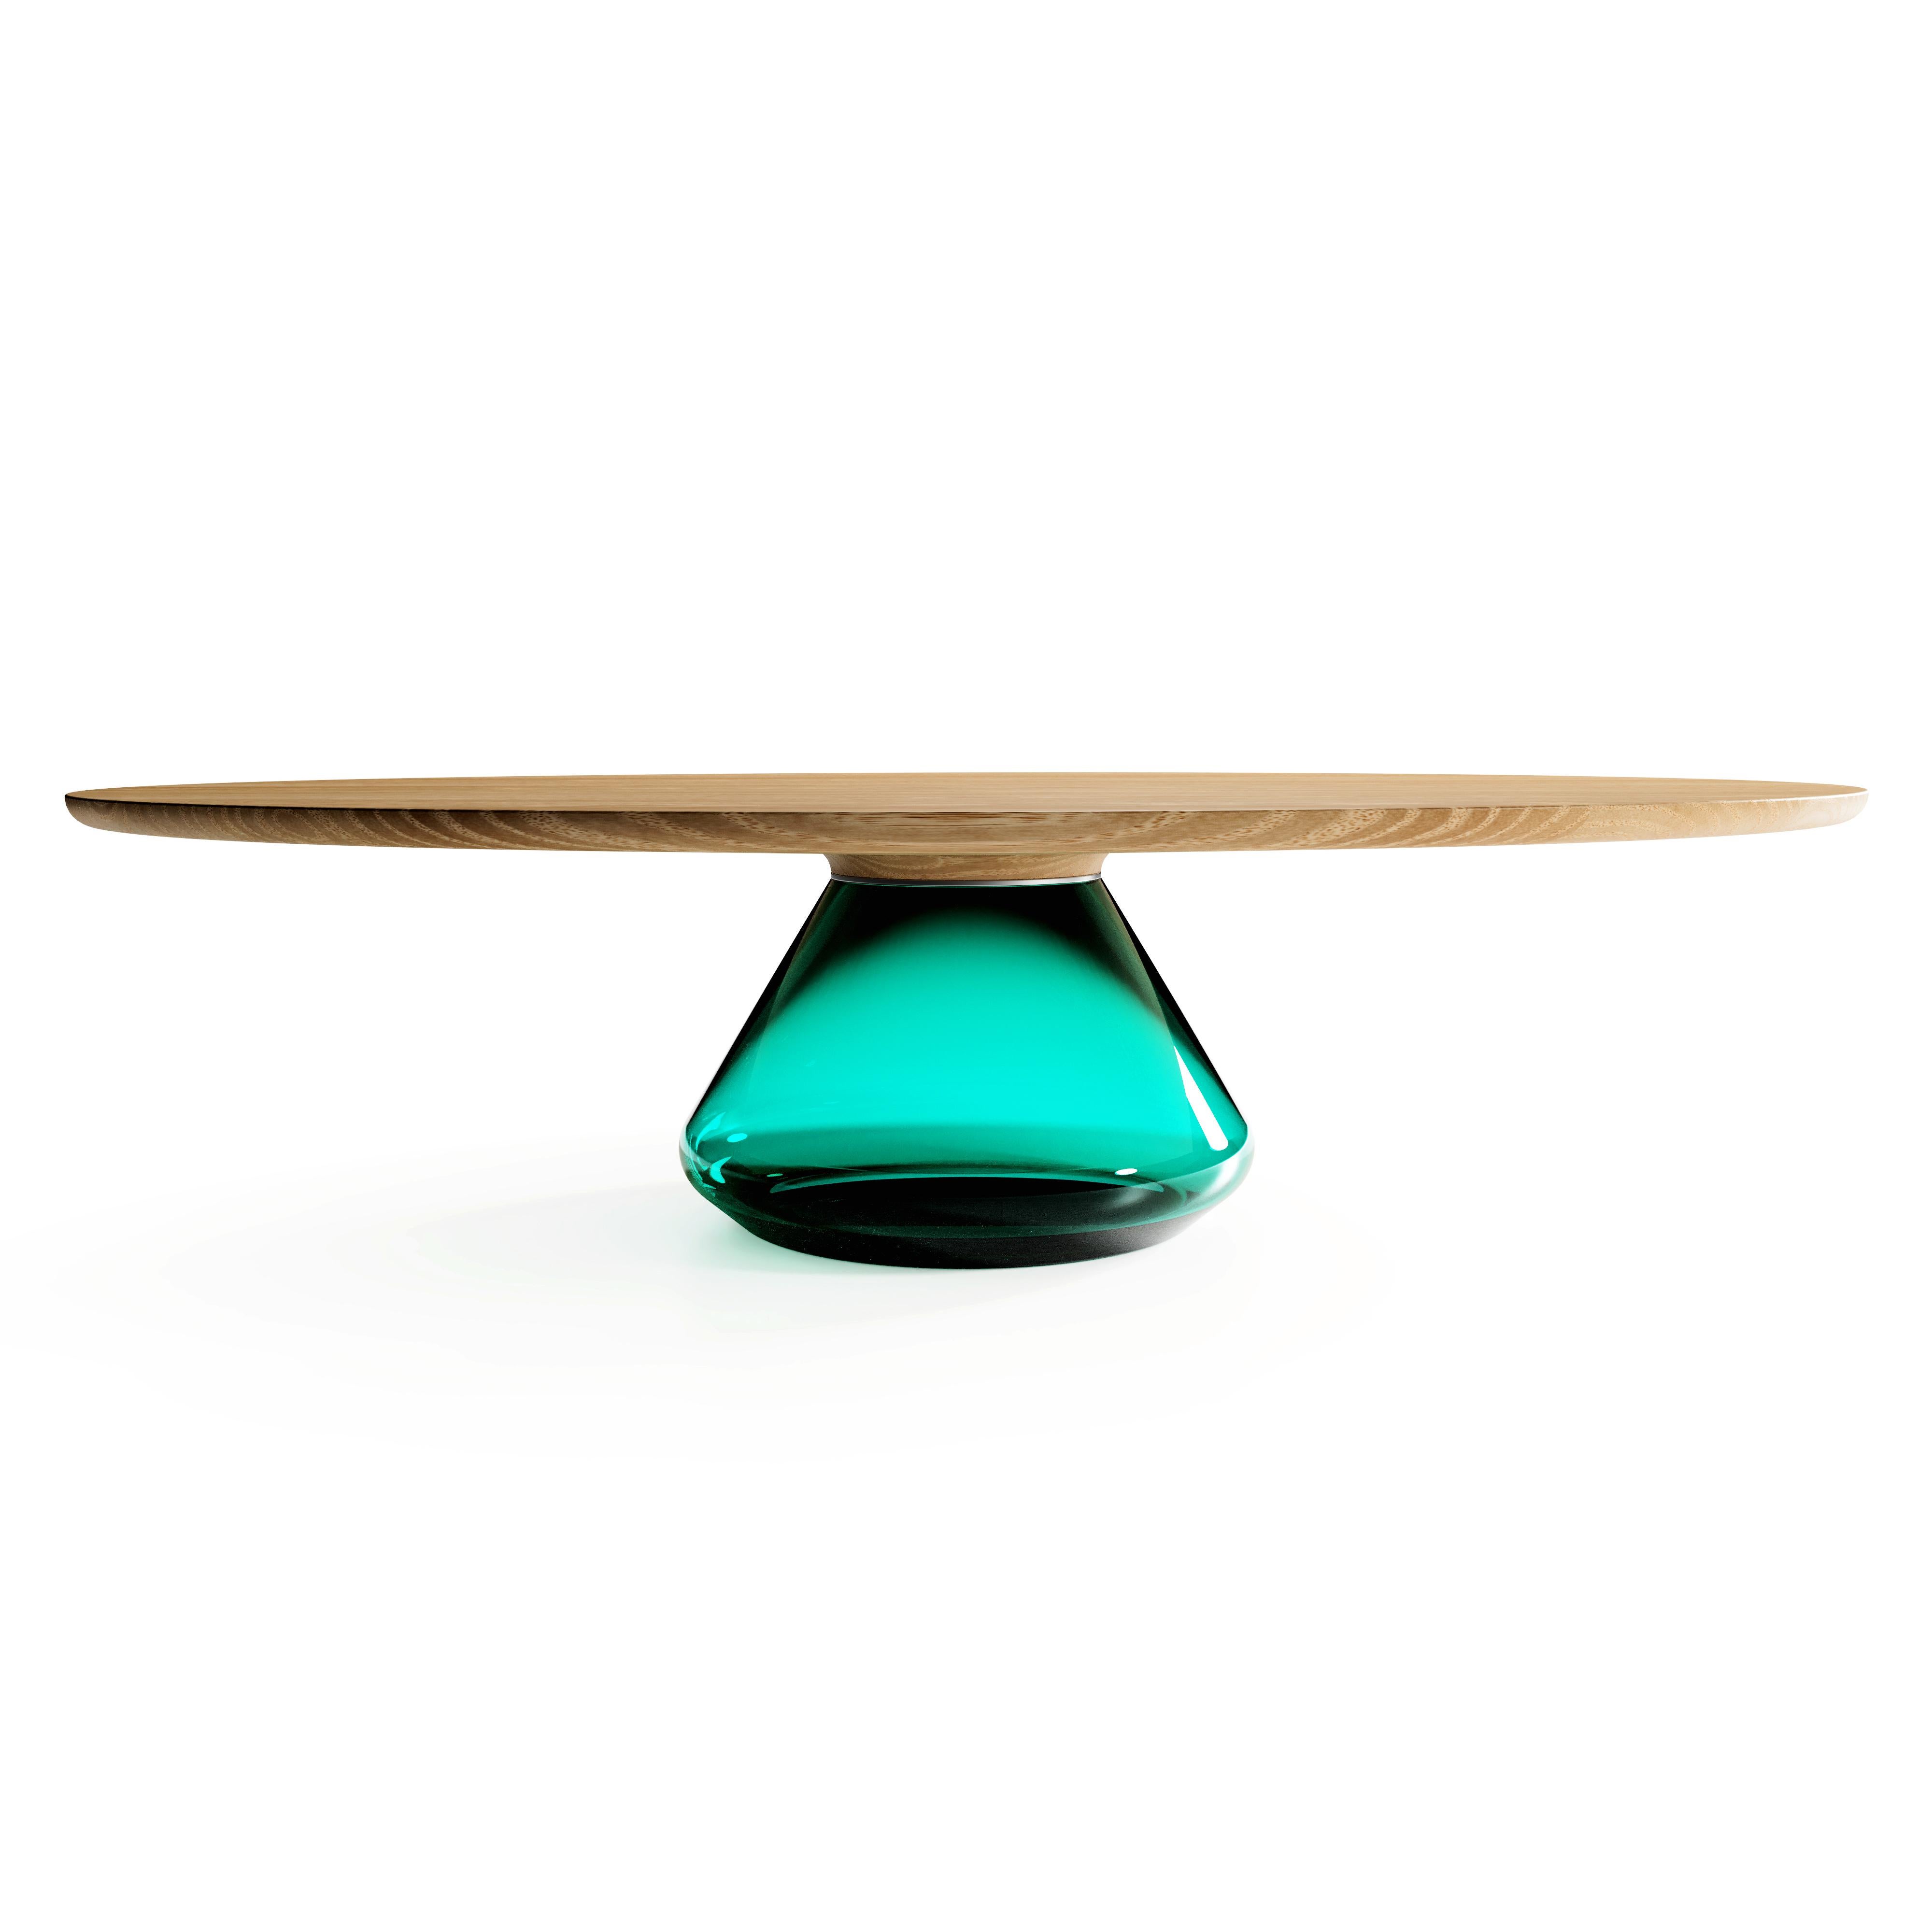 The emerald Eclipse I, limited edition coffee table by Grzegorz Majka
Limited edition of 8
Dimensions: 54 x 48 x 14 in
Materials: Glass, oak

The total eclipse of every interior? With this amazing table everything is possible as with its Minimalist